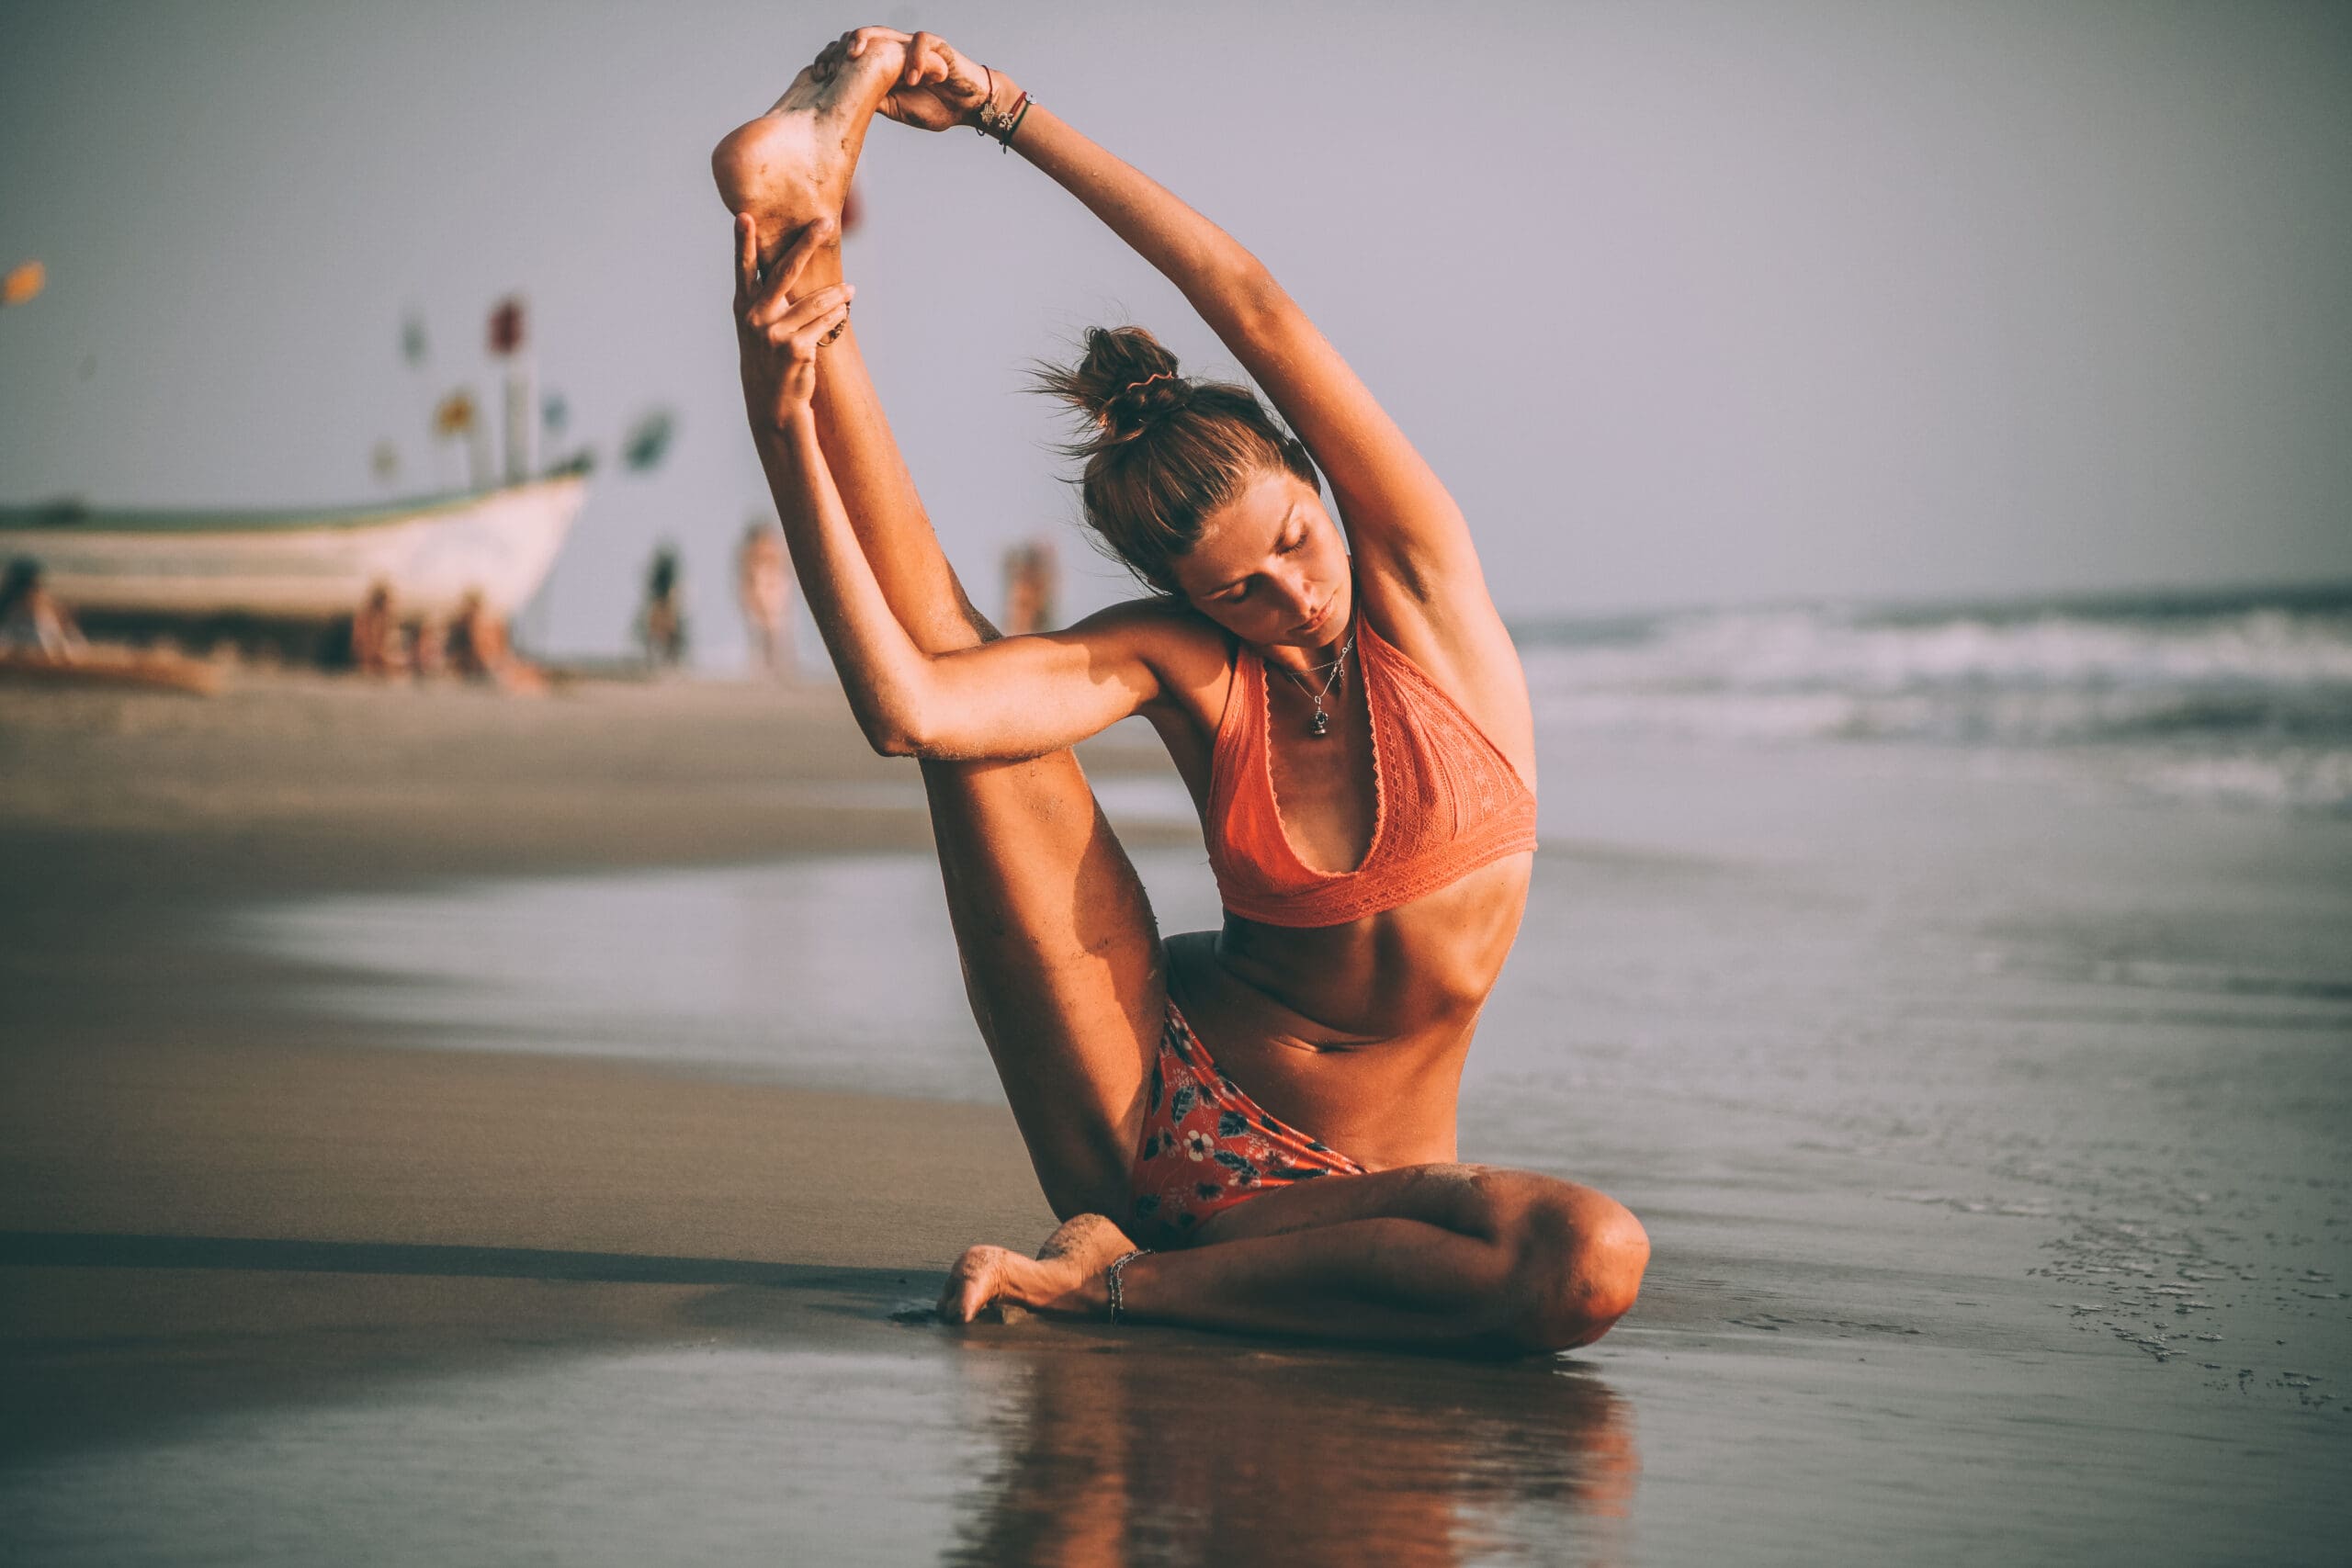 A woman in a peach bikini sitting on the wet sand against the sea stretches her right leg above her head in a yoga pose